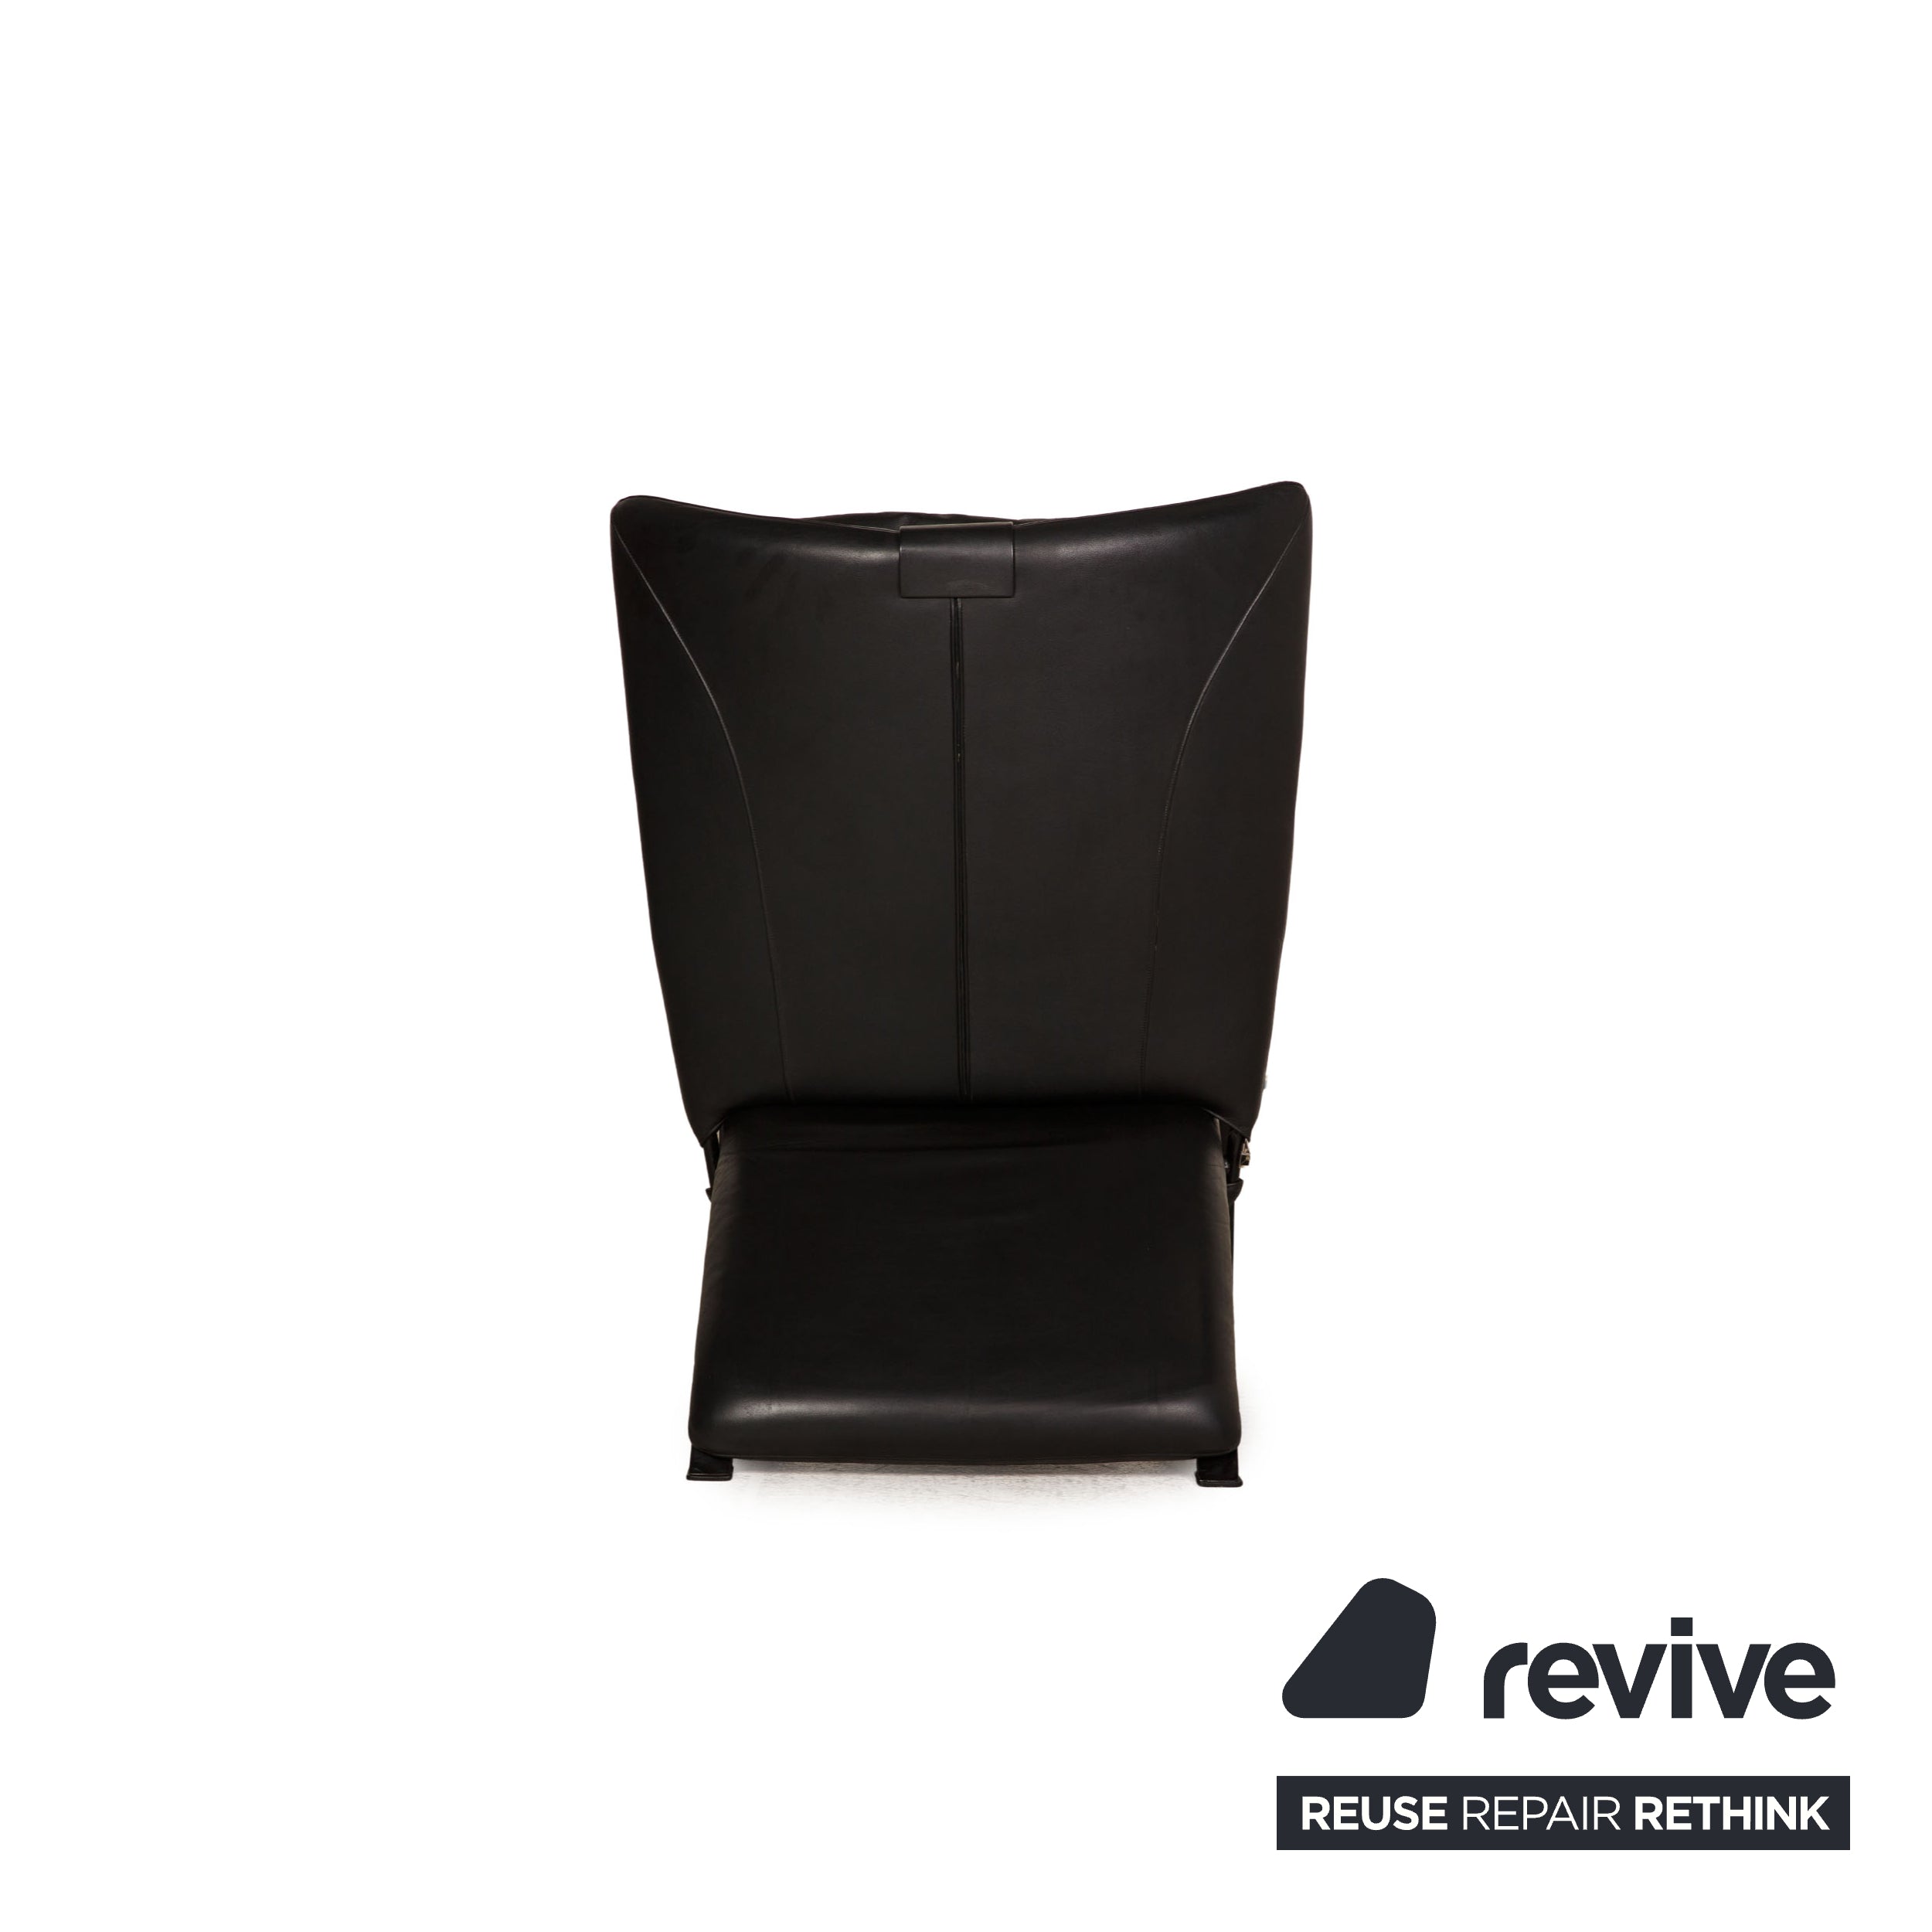 WK Wohnen Spot 698 Leather Armchair Black Function relax function